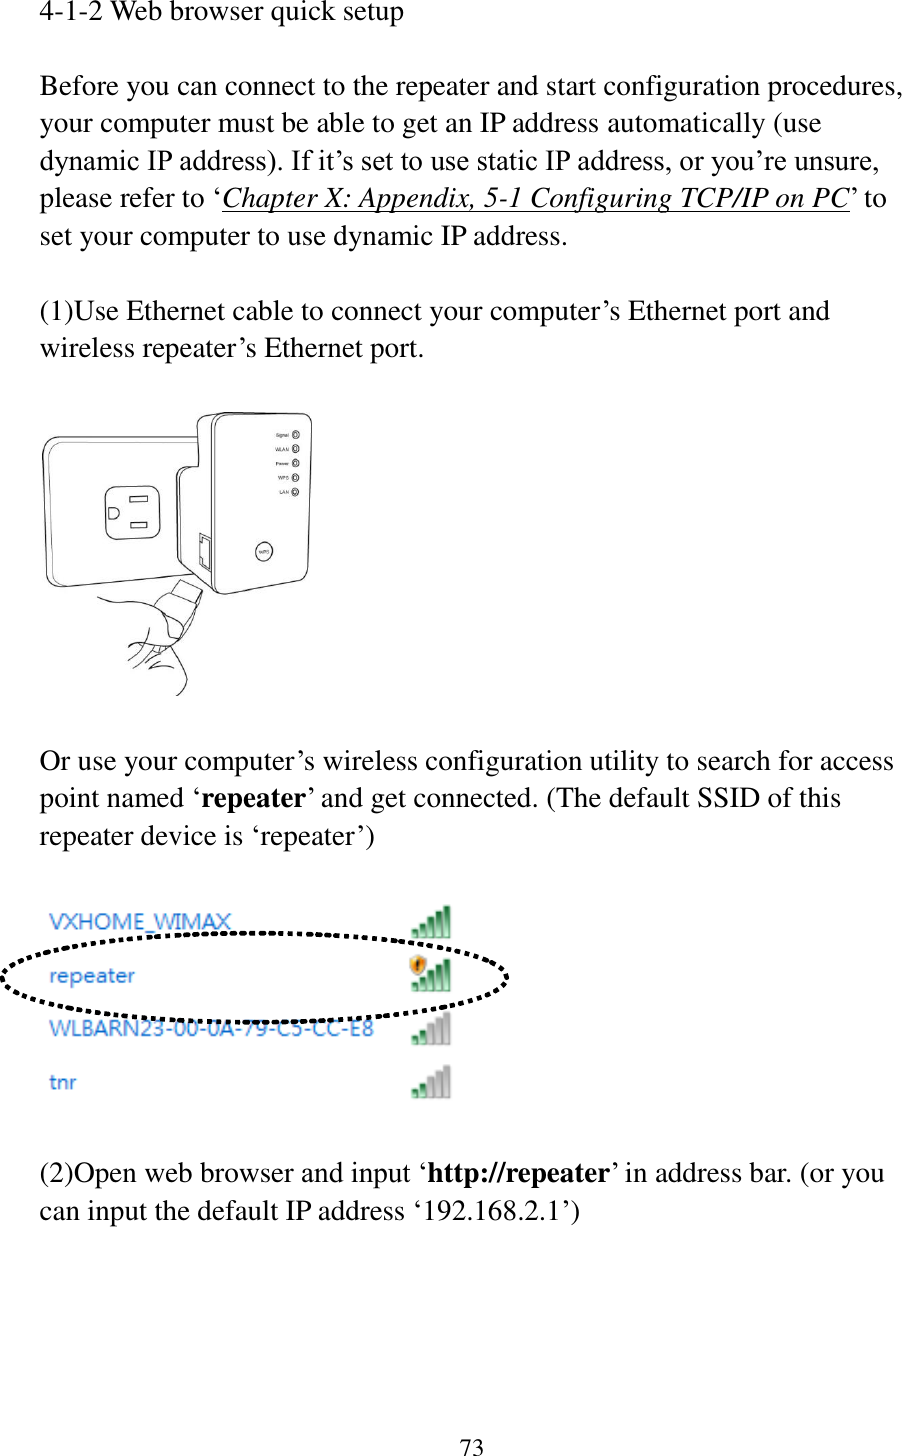 73  4-1-2 Web browser quick setup  Before you can connect to the repeater and start configuration procedures, your computer must be able to get an IP address automatically (use dynamic IP address). If it‟s set to use static IP address, or you‟re unsure, please refer to „Chapter X: Appendix, 5-1 Configuring TCP/IP on PC‟ to set your computer to use dynamic IP address.  (1)Use Ethernet cable to connect your computer‟s Ethernet port and wireless repeater‟s Ethernet port.    Or use your computer‟s wireless configuration utility to search for access point named „repeater‟ and get connected. (The default SSID of this repeater device is „repeater‟)    (2)Open web browser and input „http://repeater‟ in address bar. (or you can input the default IP address „192.168.2.1‟)  